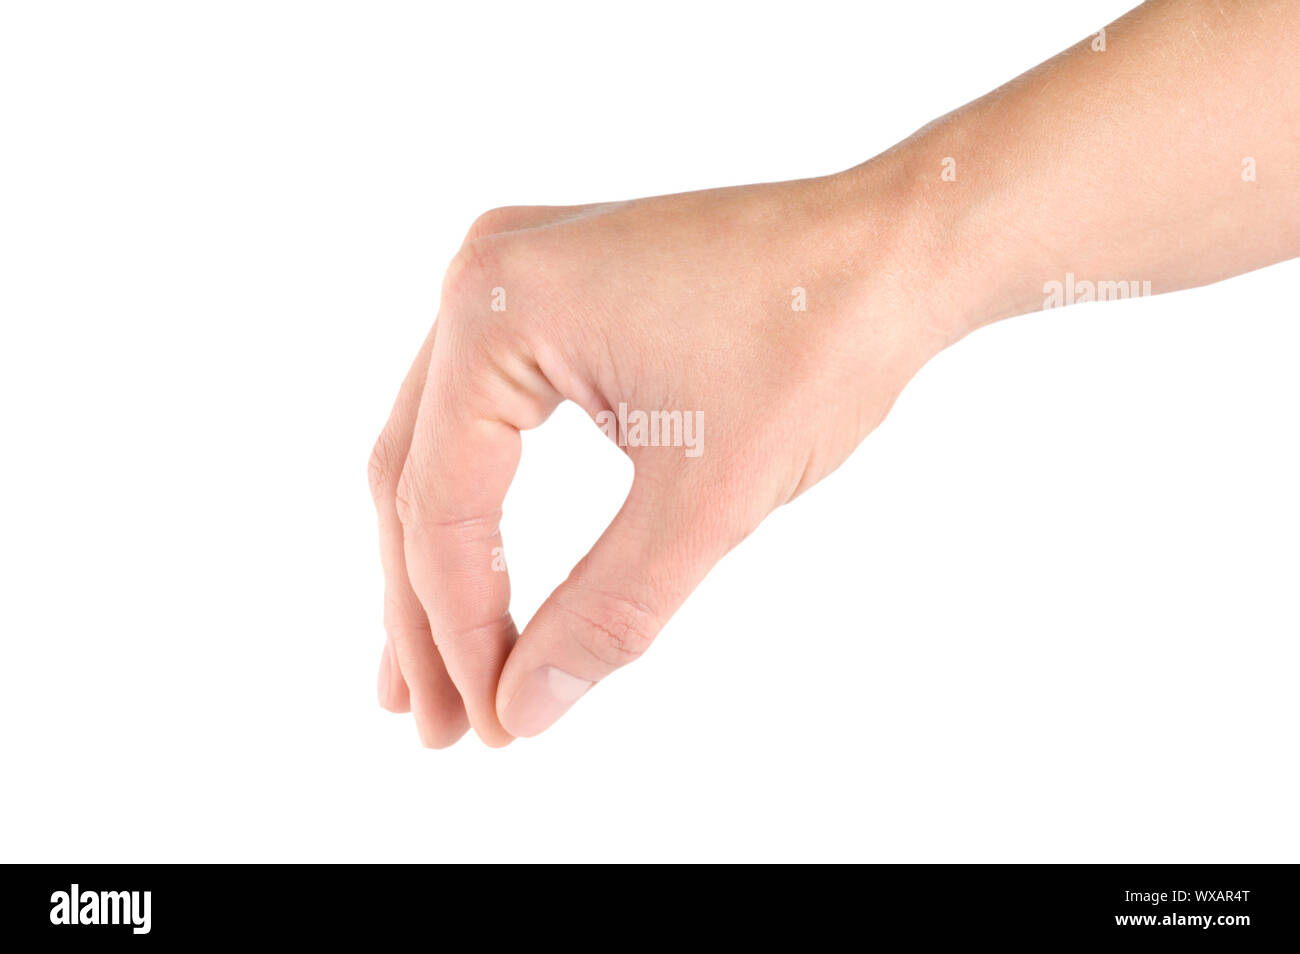 https://c8.alamy.com/comp/WXAR4T/hand-with-thumb-and-forefinger-together-simulating-holding-or-picking-something-up-isolated-on-white-background-WXAR4T.jpg